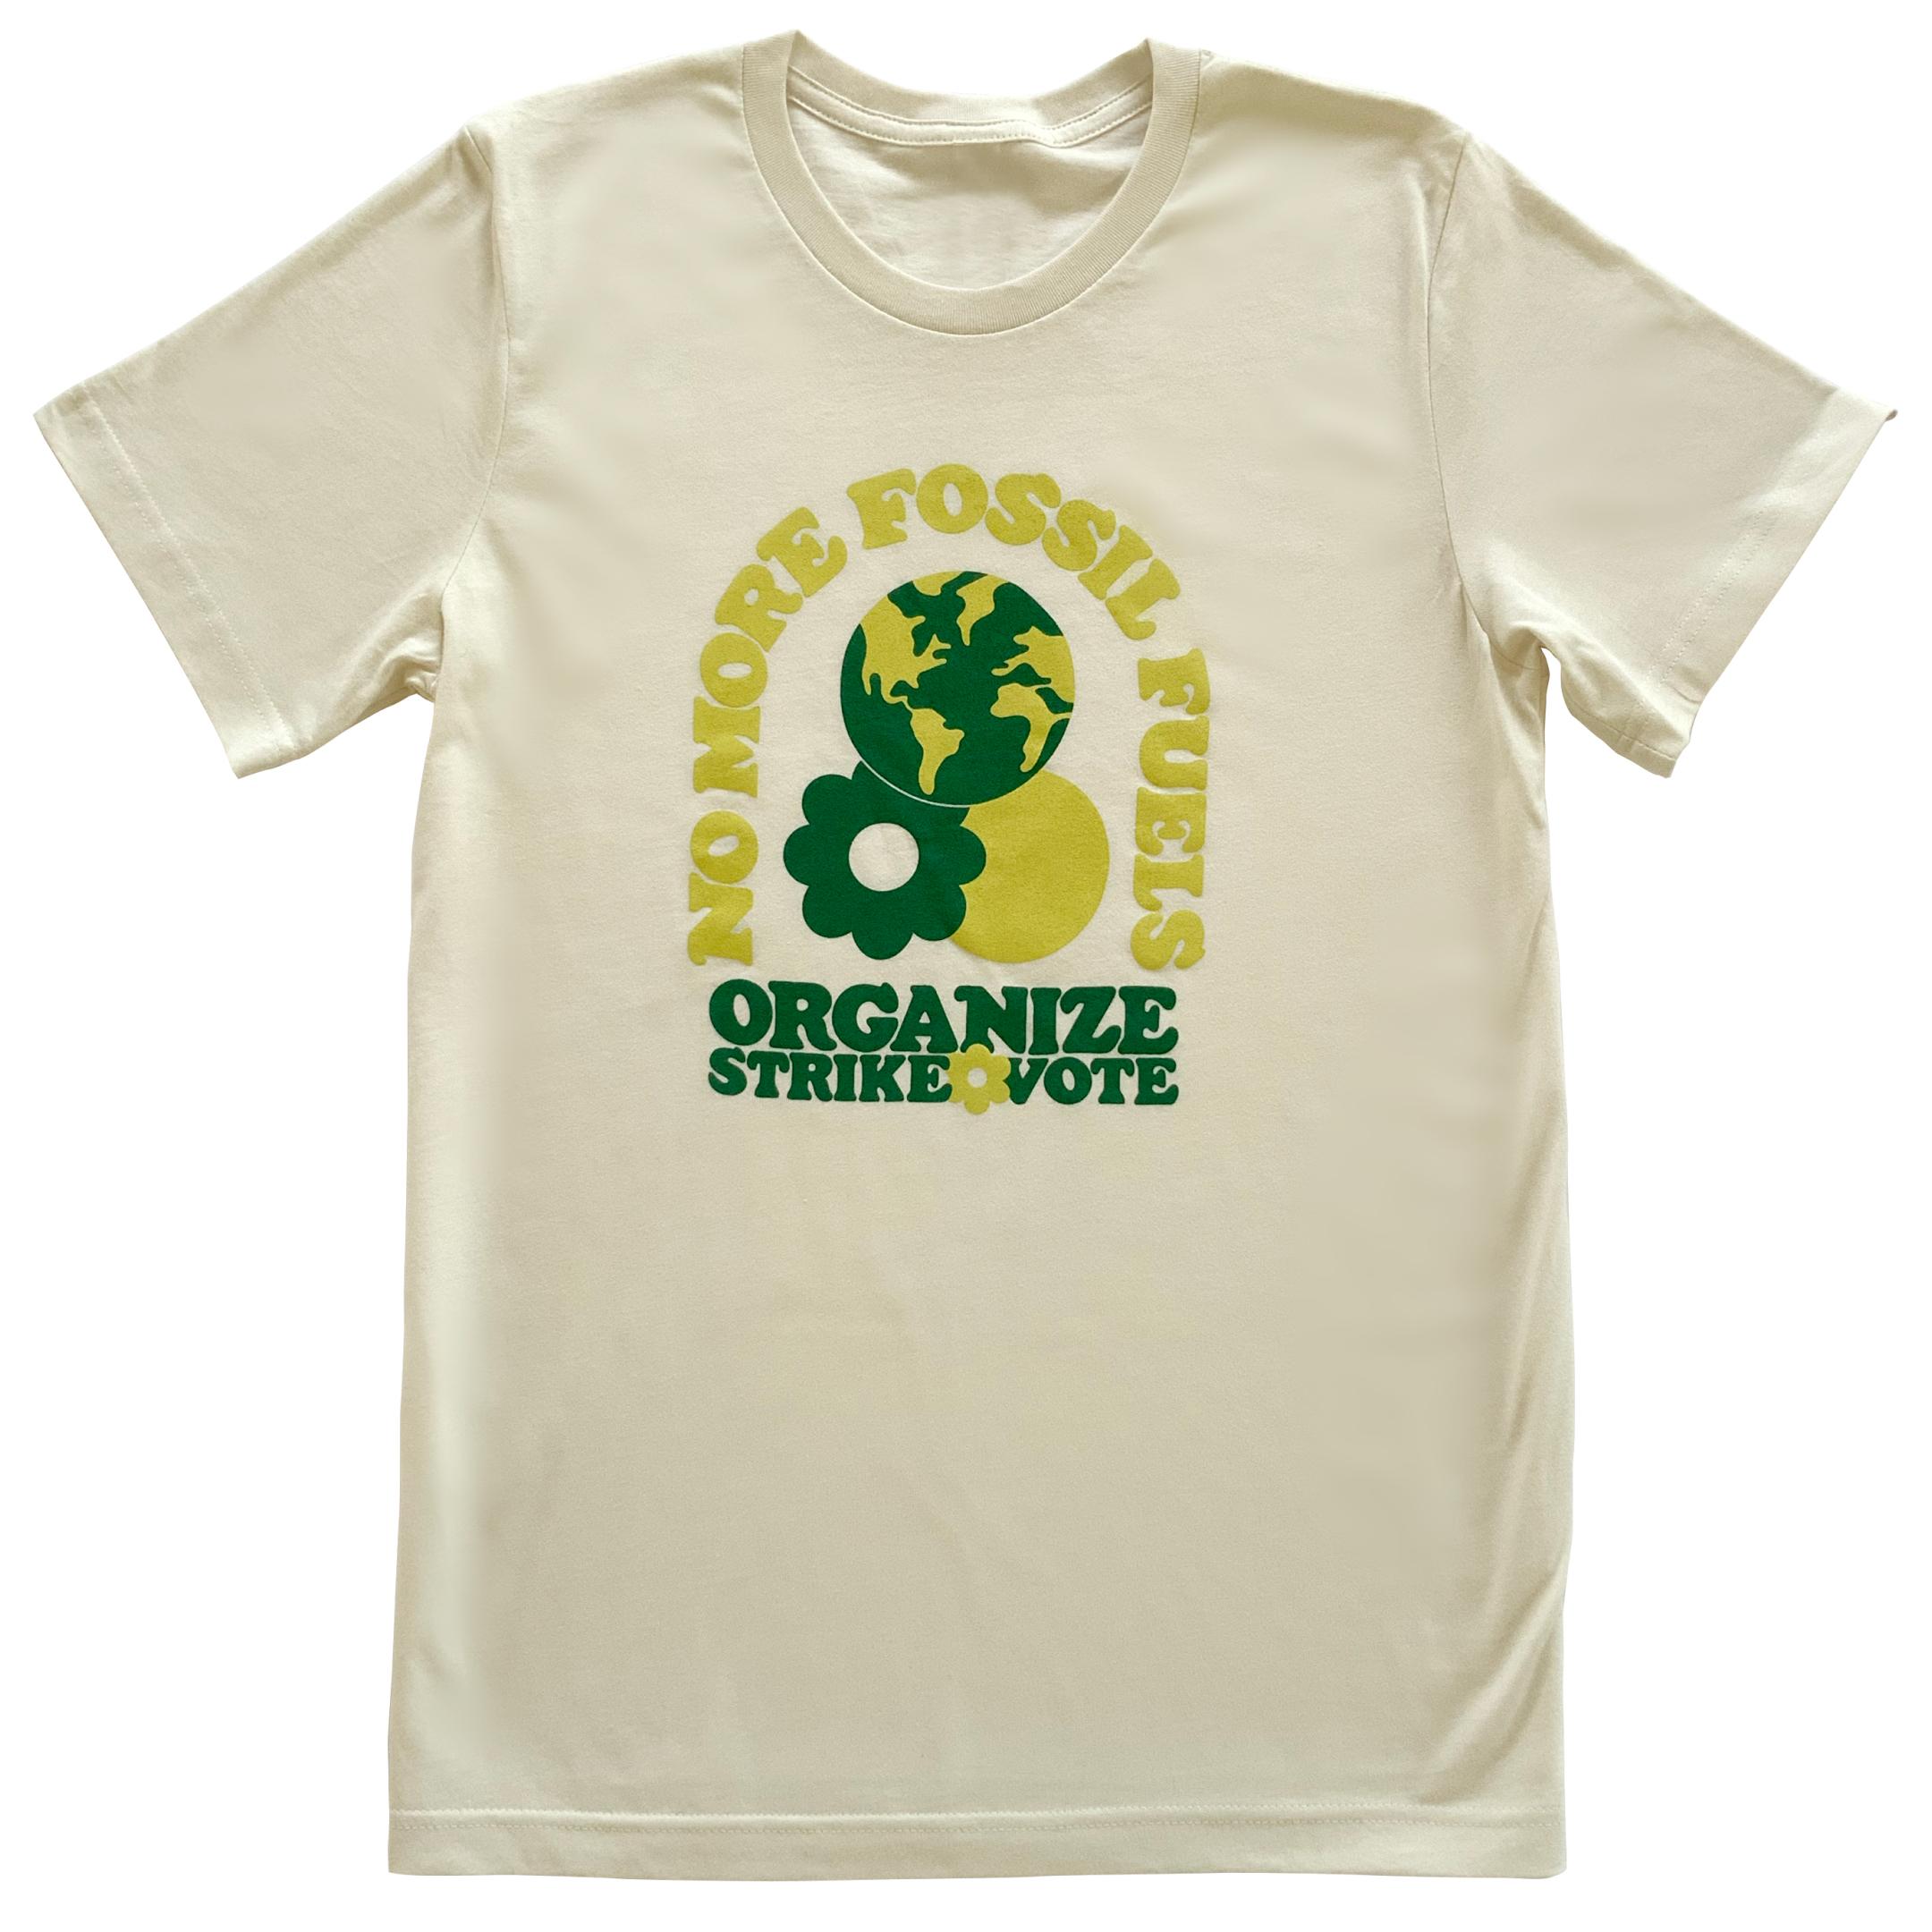 
              Off-white t-shirt with green text laid flat.
              The design says “No more fossil fuels” in an arch
              and then underneath it reads “Organize, Strike, Vote.”
              There is an illustration of the earth, sun and a daisy also.
            